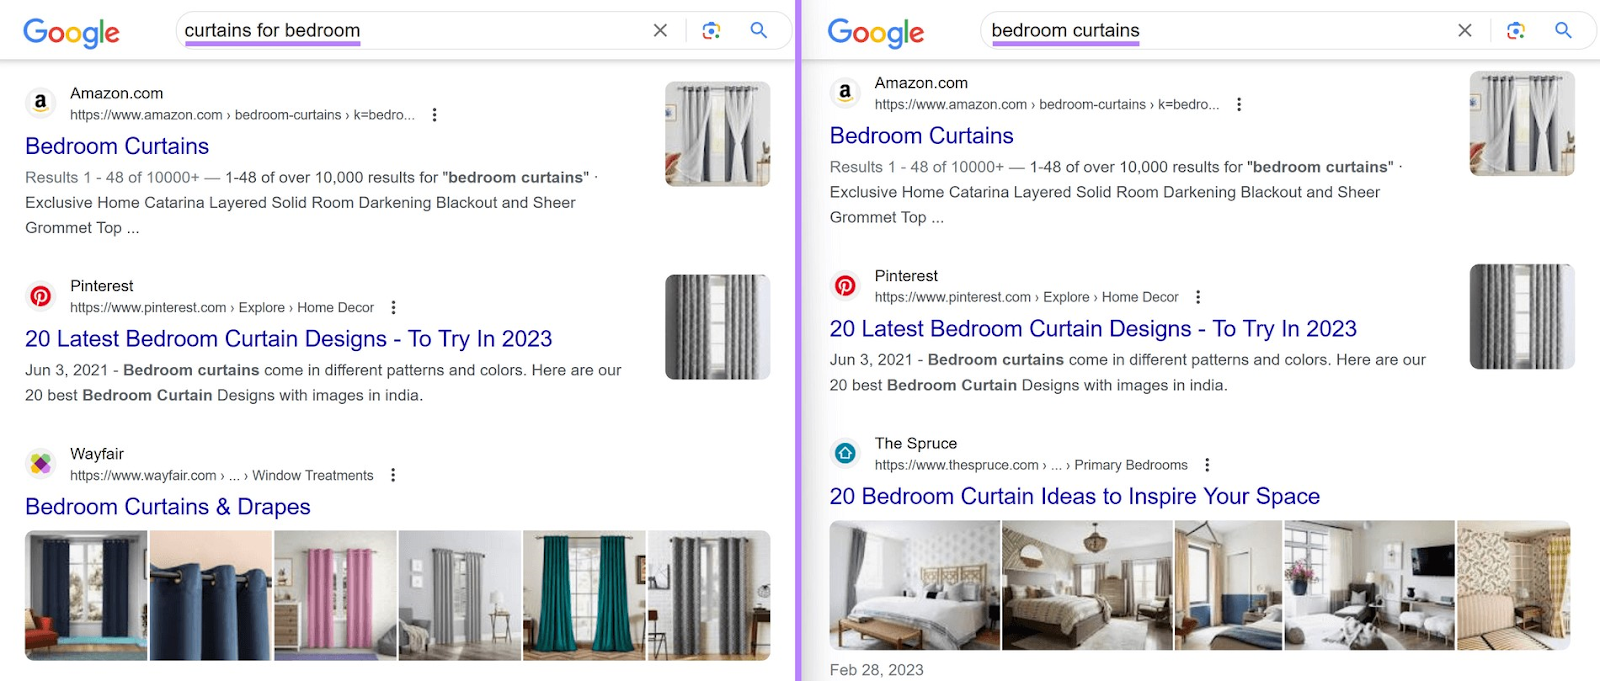 Google search results for “curtains for bedroom” and “bedroom curtains”